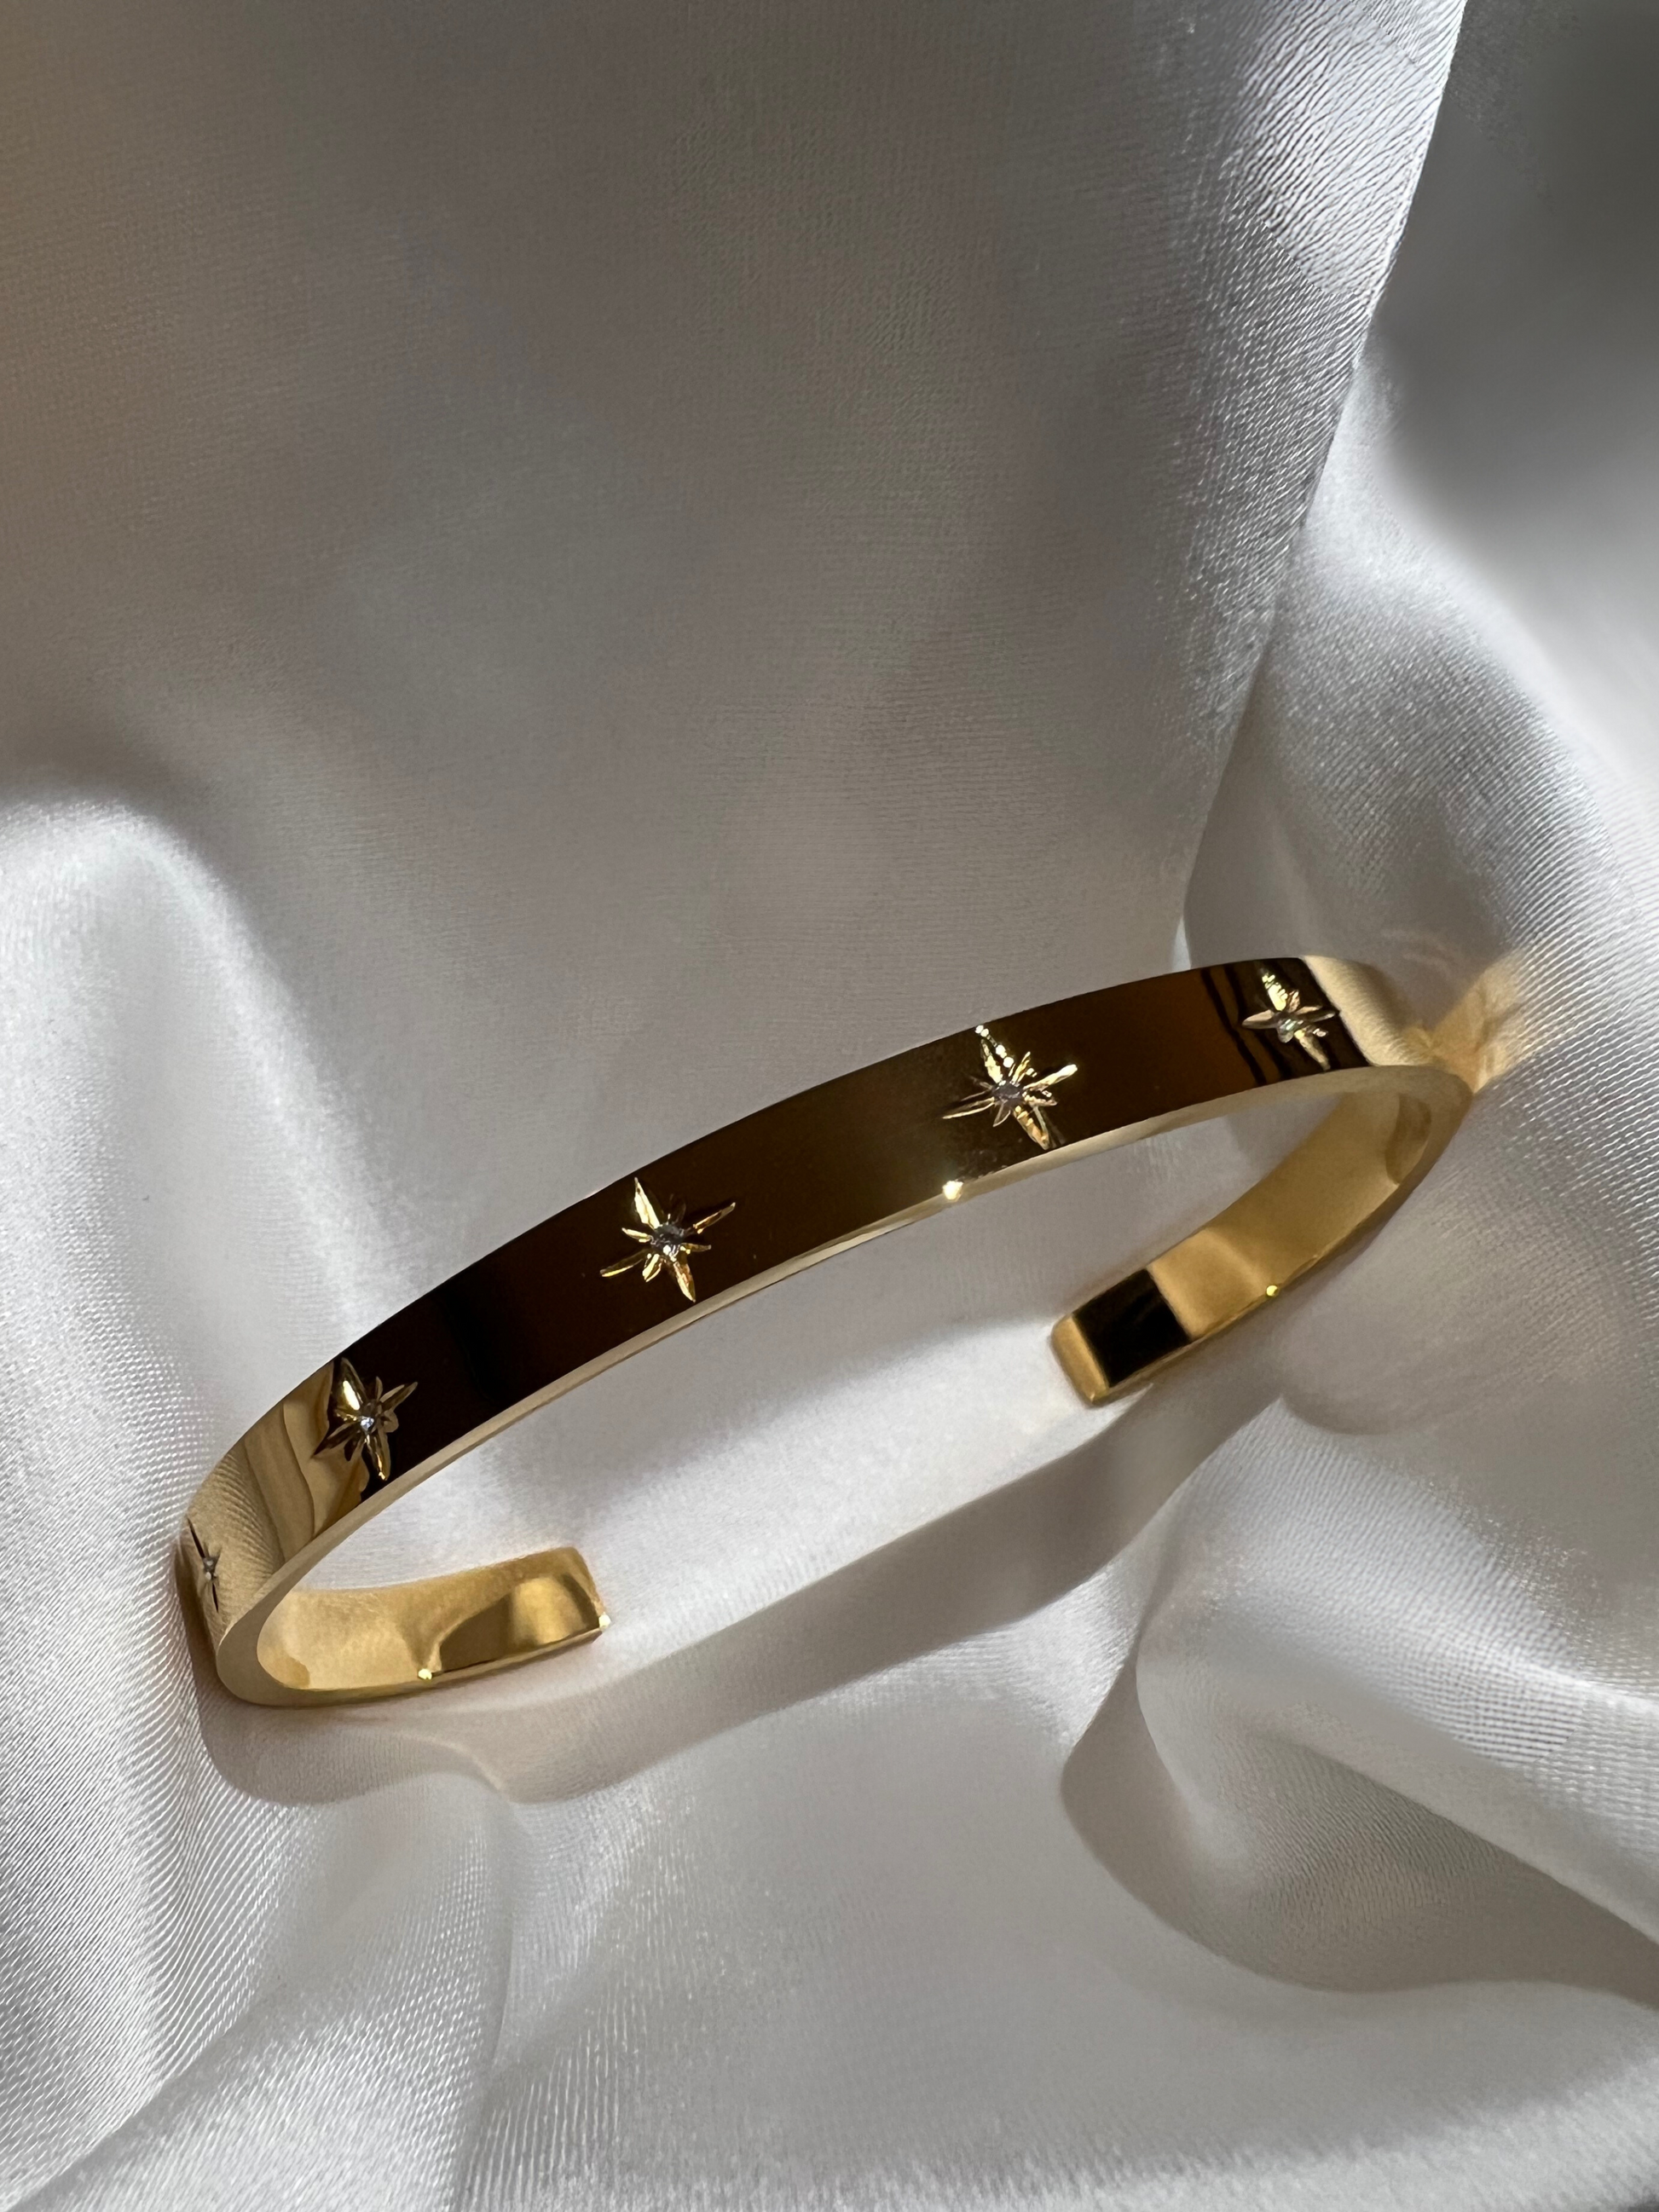 18K gold plated, stainless steel, adjustable bracelet with white cubic zirconia in a star design